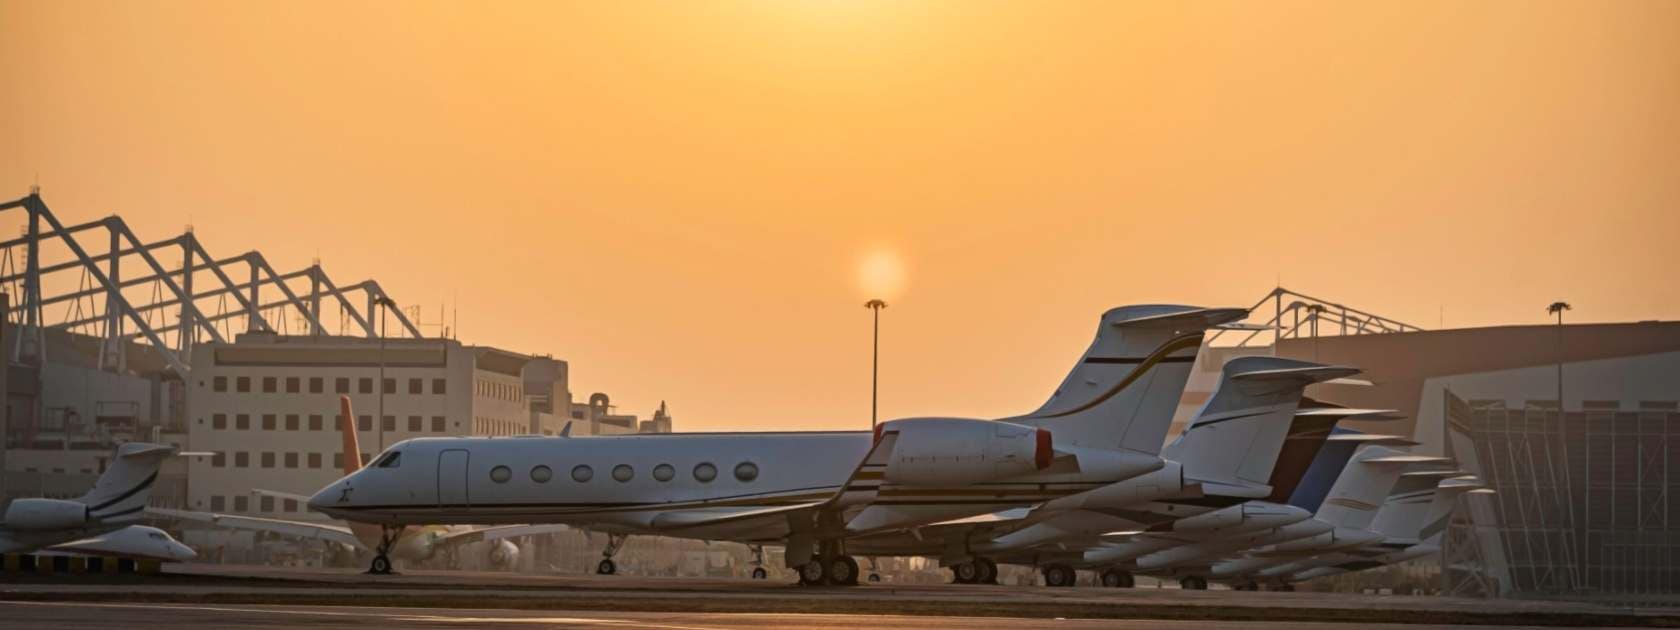 Private jets on the airstrip